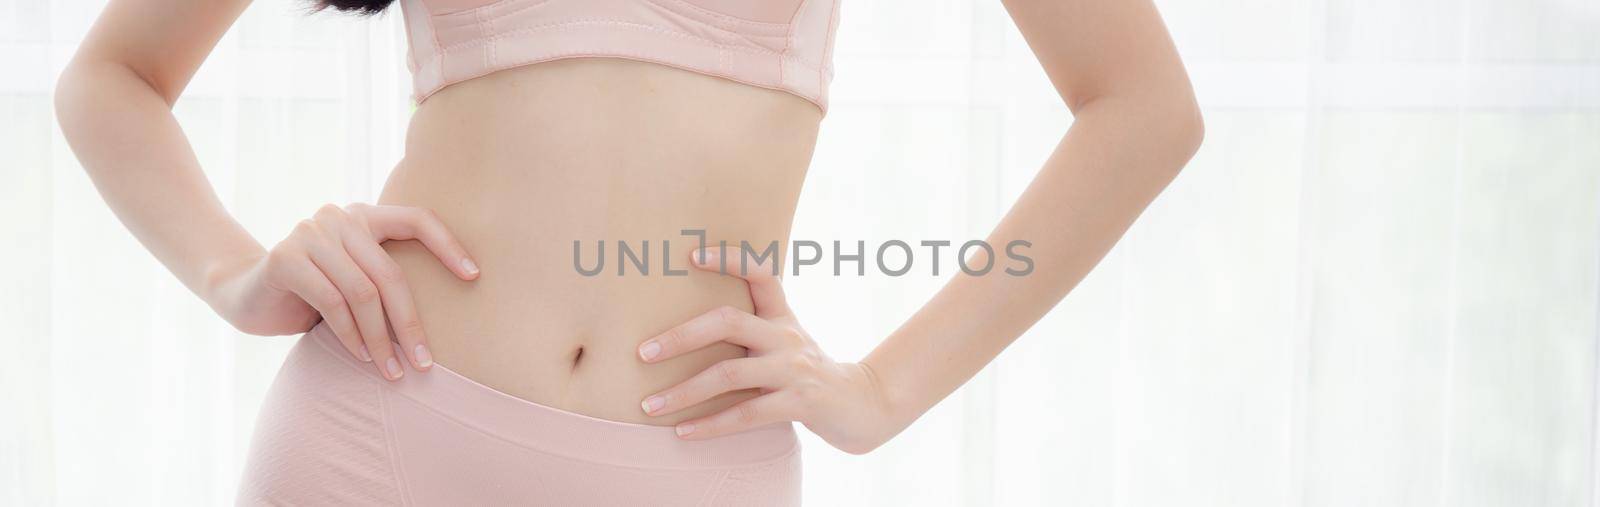 Closeup asian woman wear underwear beautiful body belly slim shape sexy with diet at room, asia girl wear bra hand touch abdomen thin with weight loss, health and wellness concept, banner website.